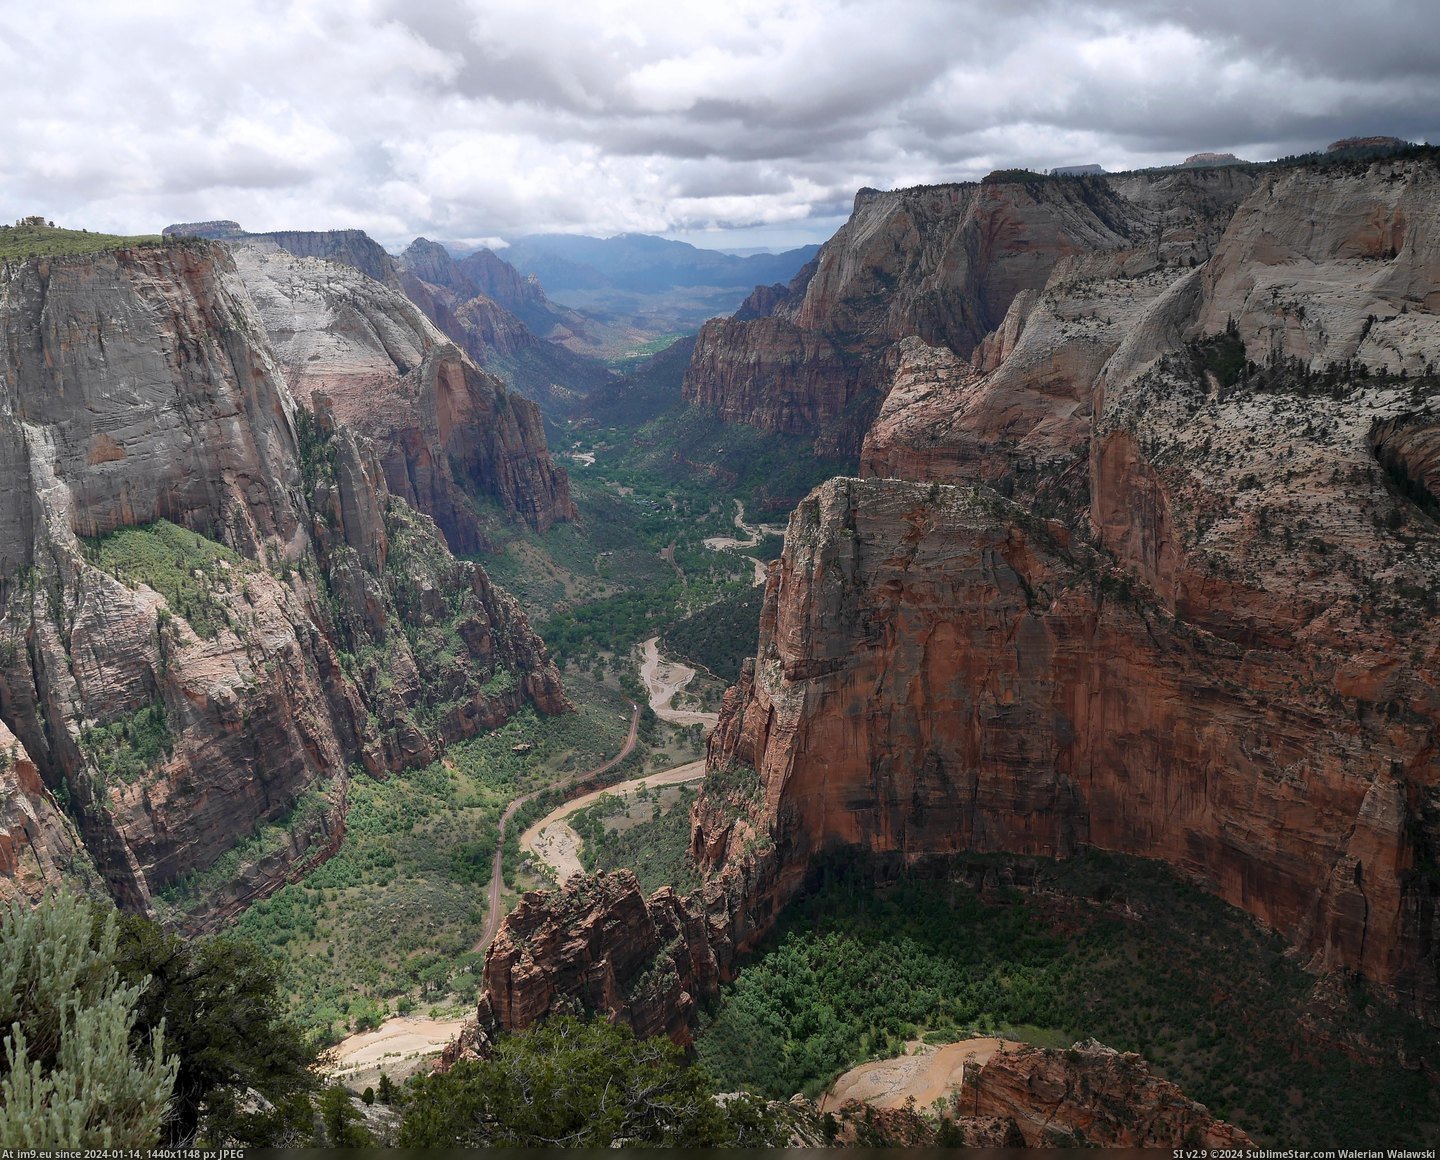 #Park #National #Observation #Point #Zion [Earthporn] Observation Point - Zion National Park, UT [4148x3319] Pic. (Изображение из альбом My r/EARTHPORN favs))